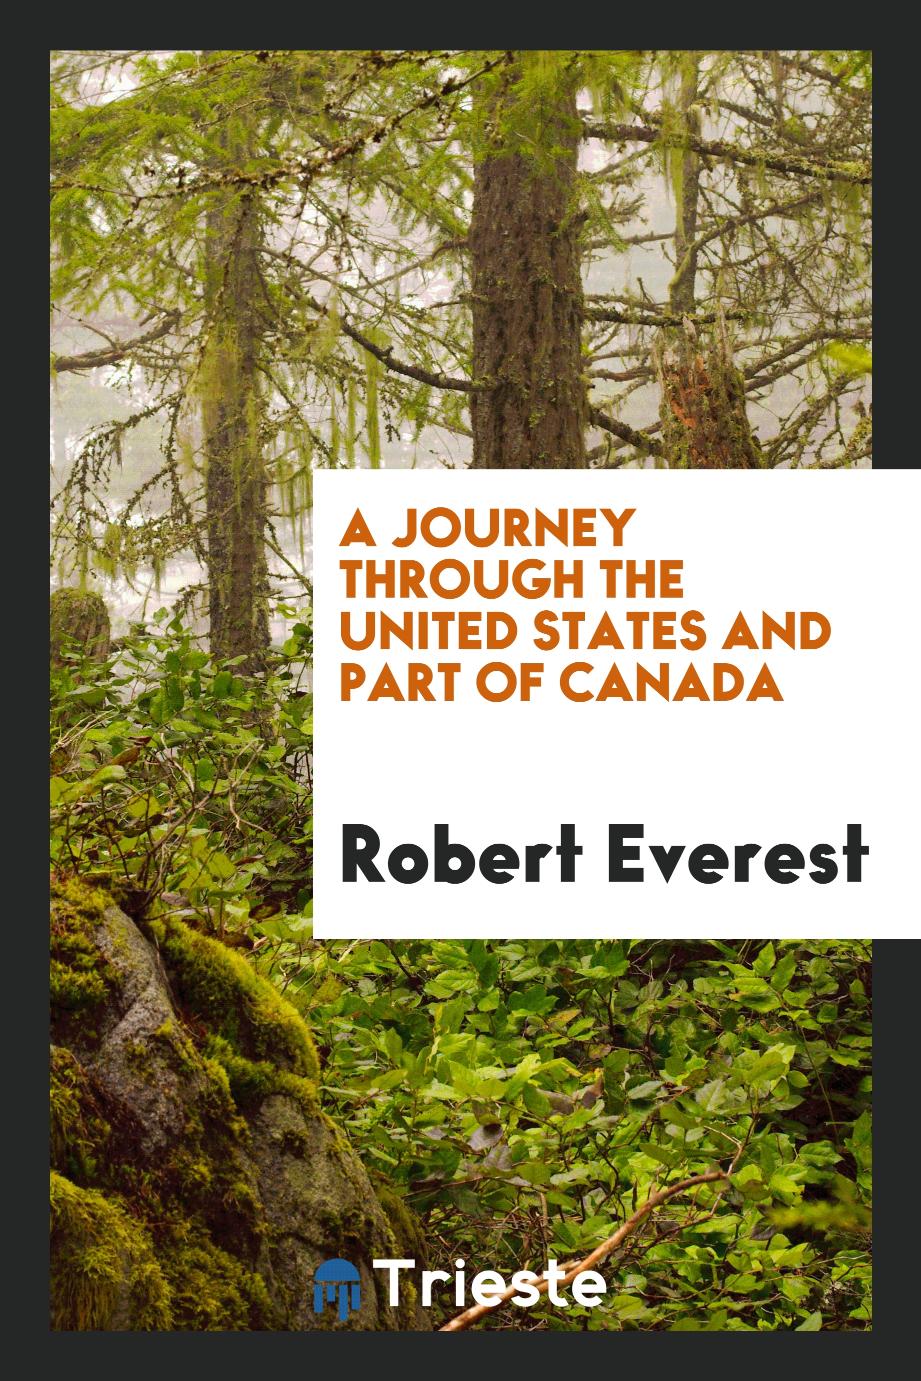 A journey through the United States and part of Canada